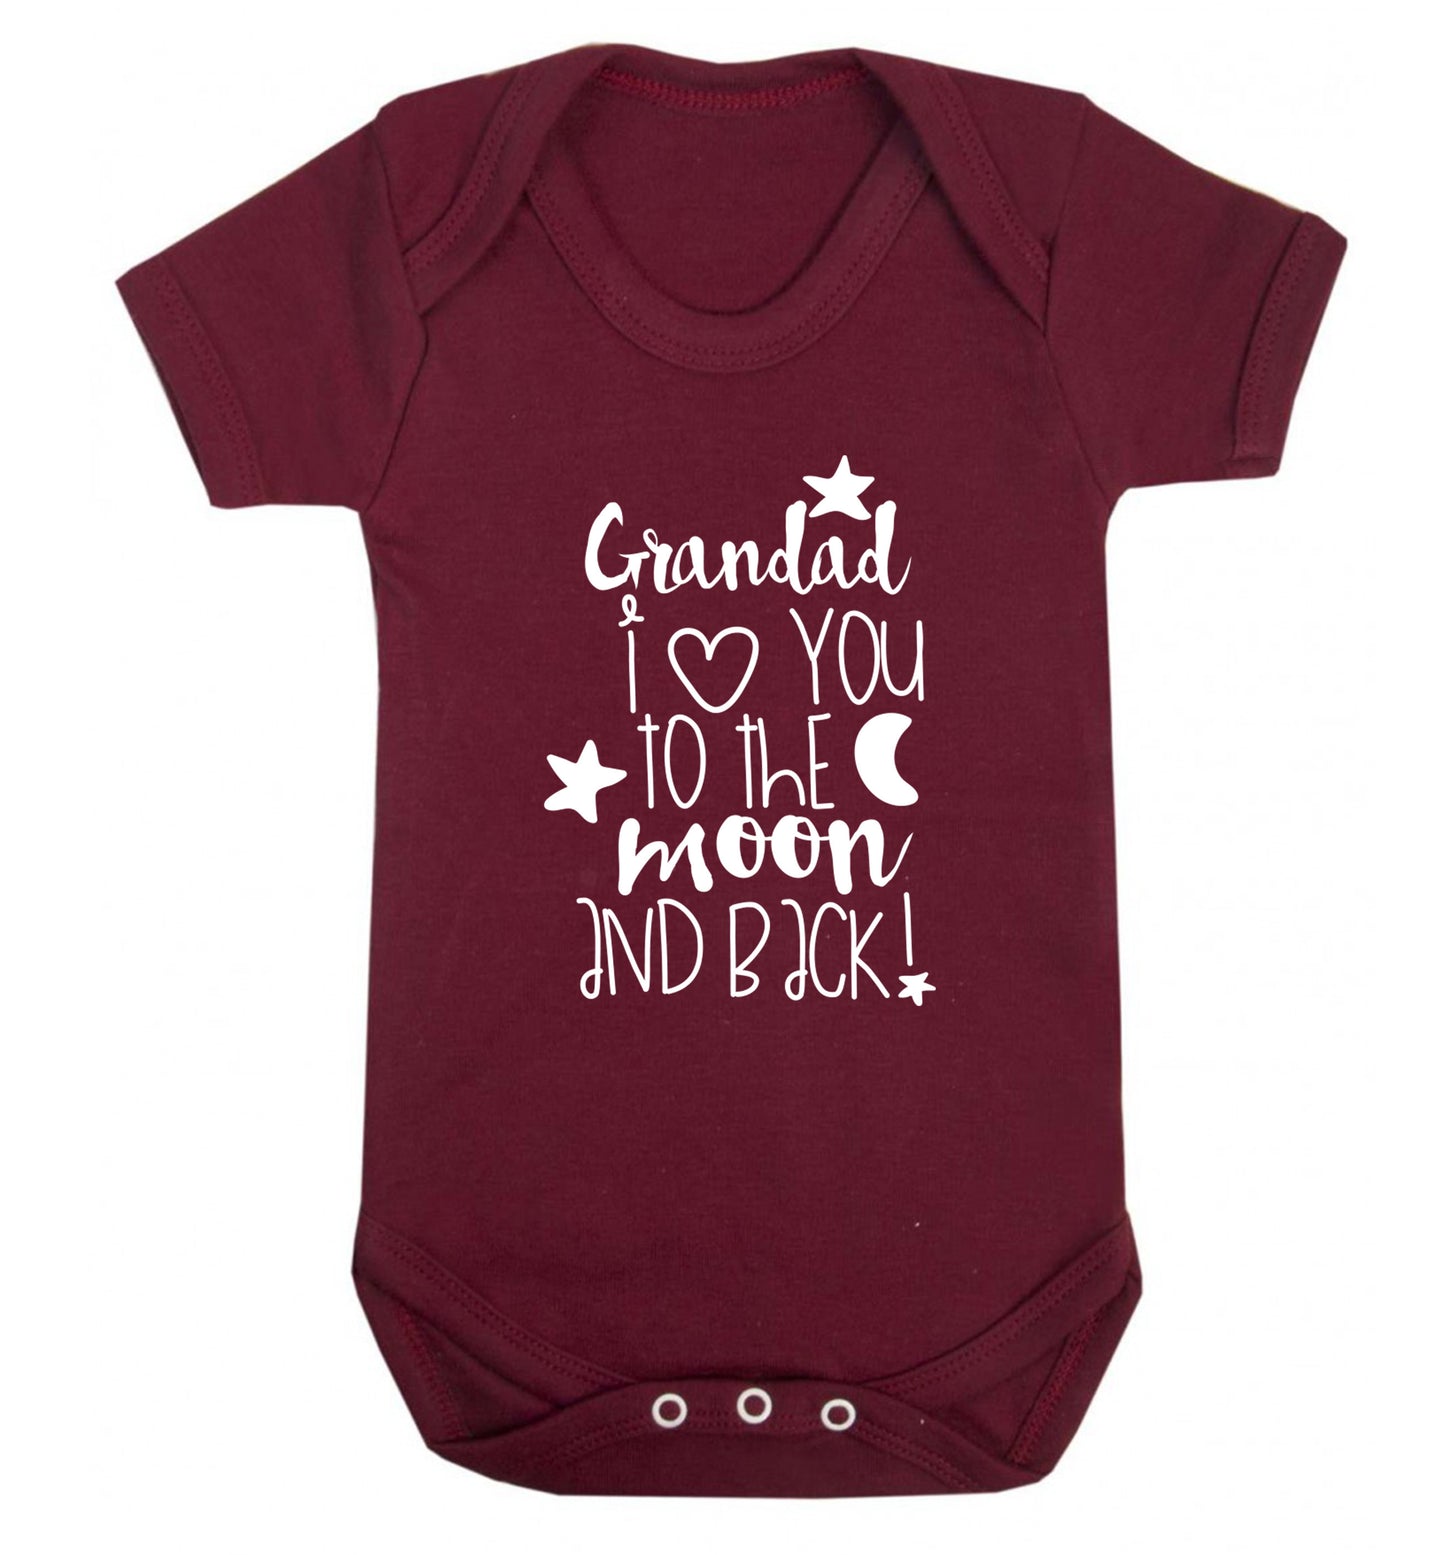 Grandad's I love you to the moon and back Baby Vest maroon 18-24 months